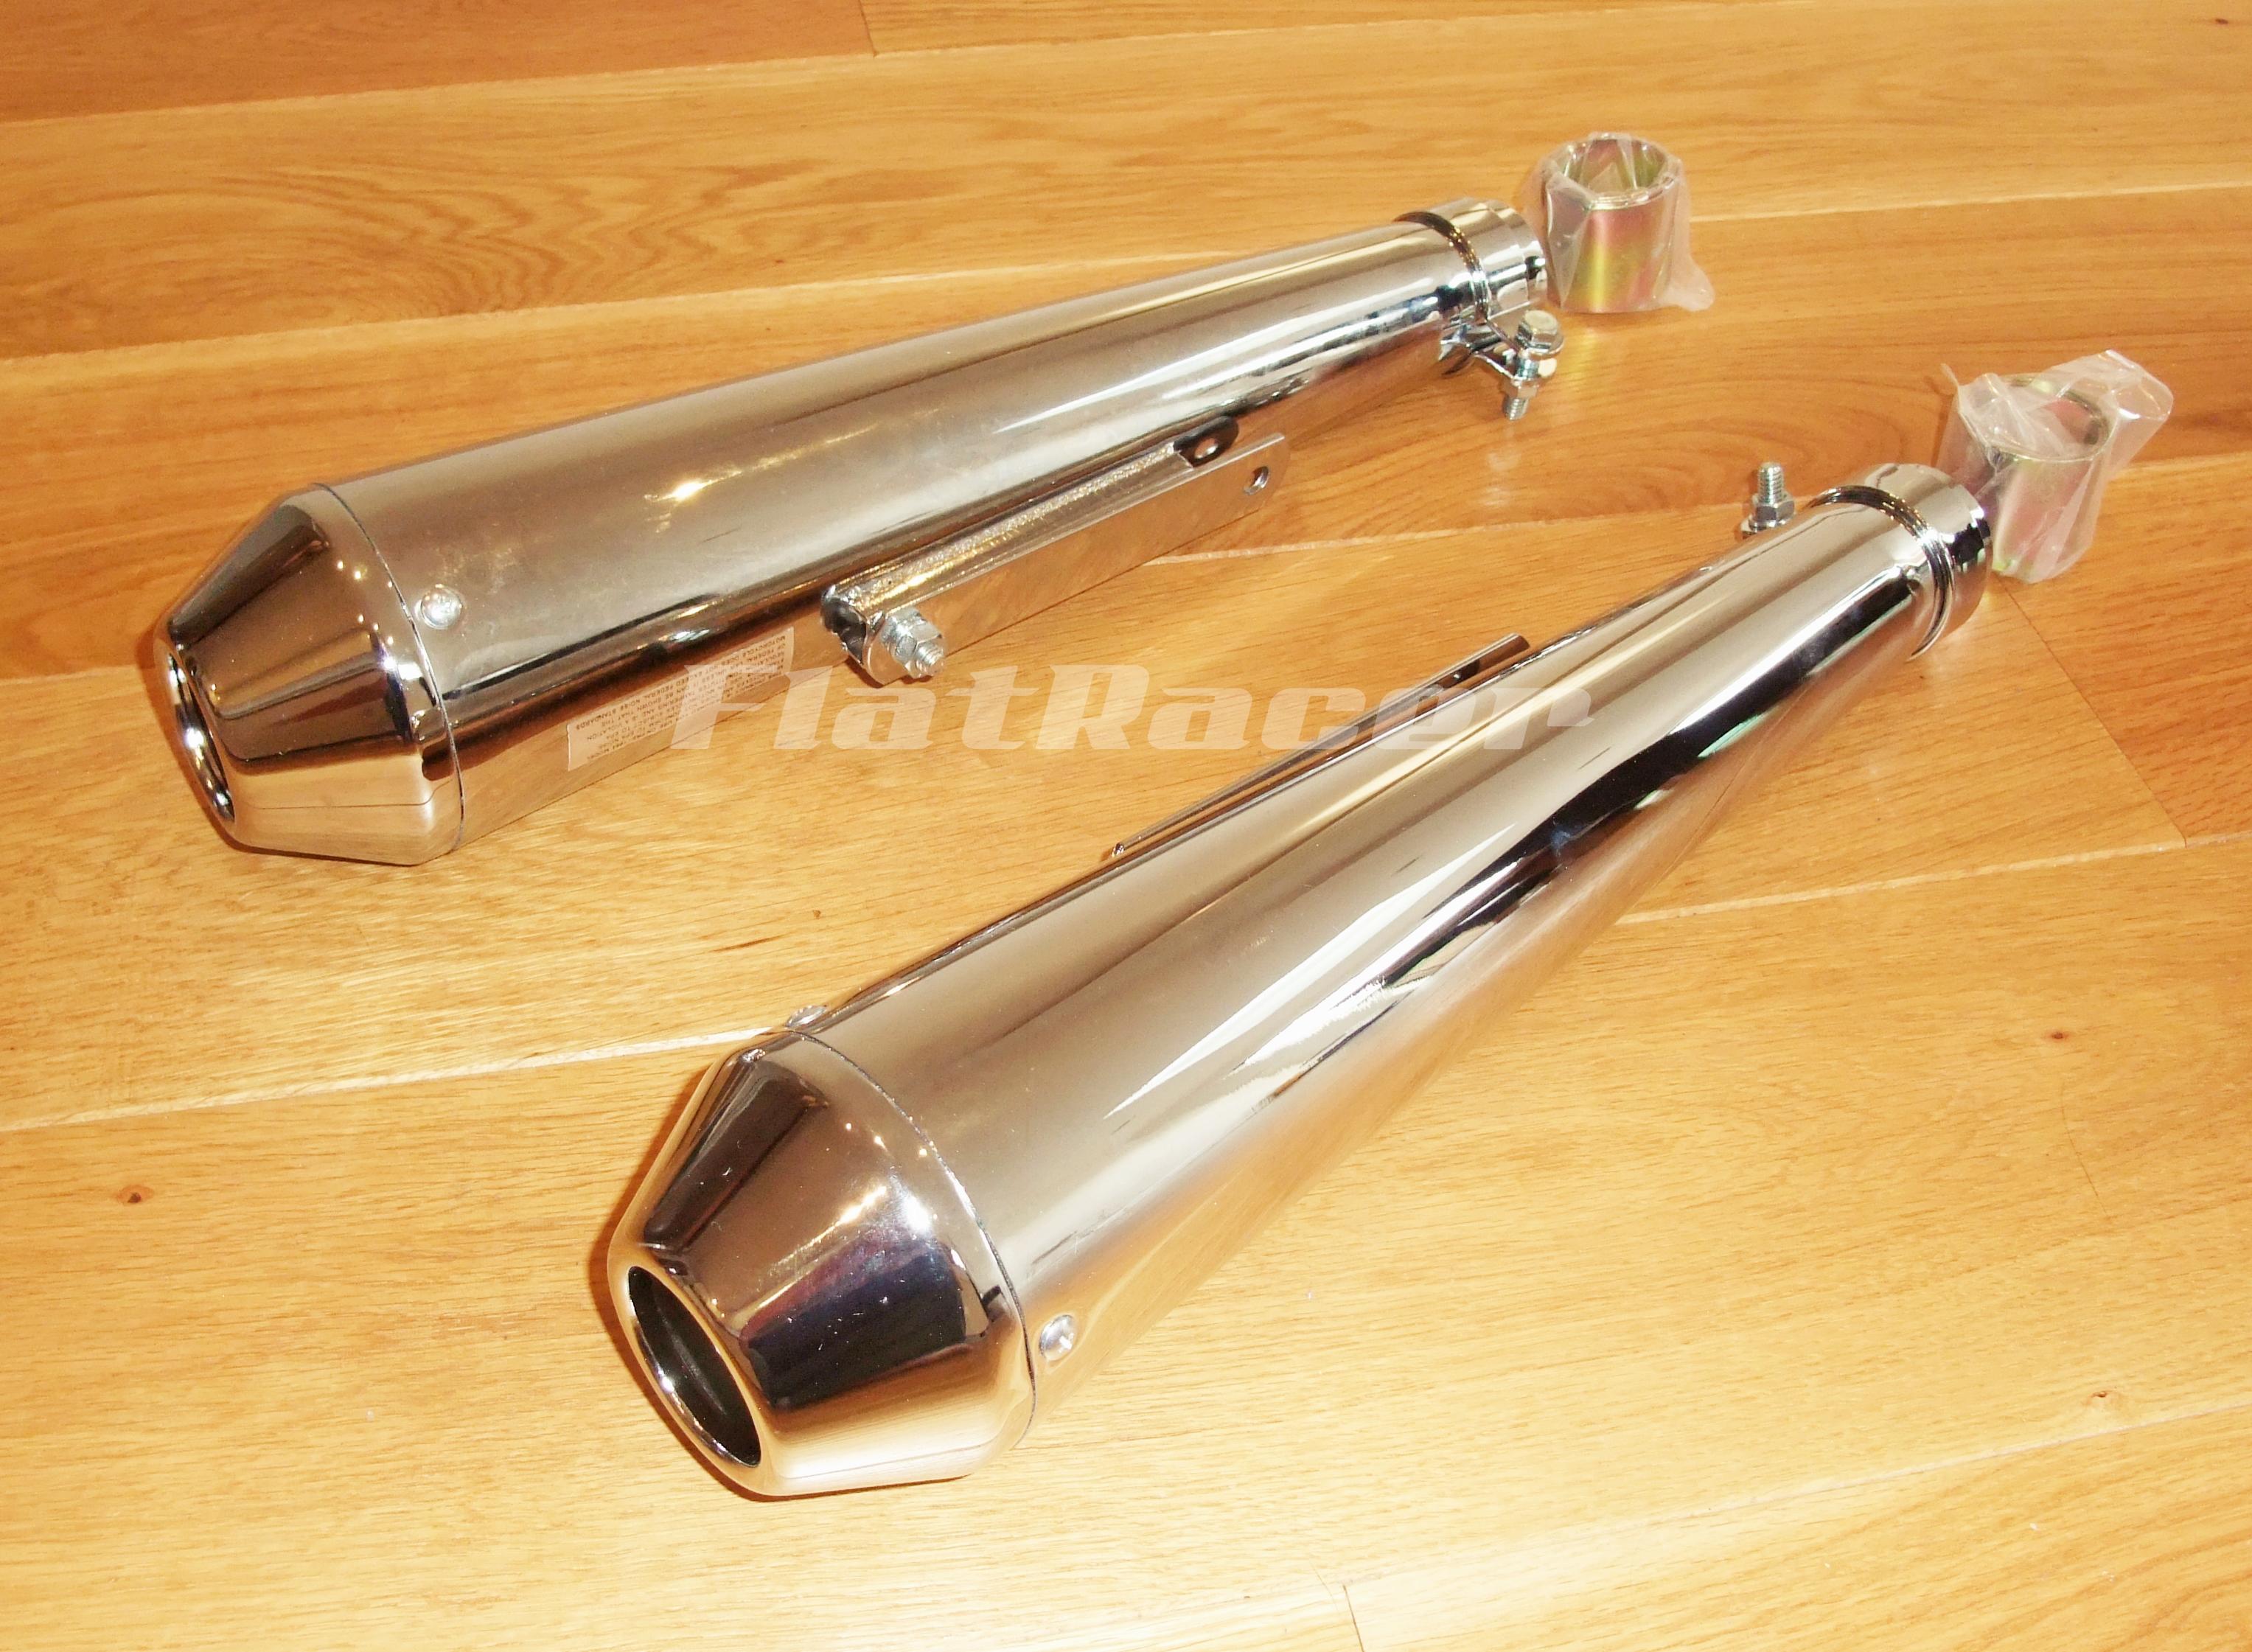 MegaTon Cafe Racer exhaust silencers